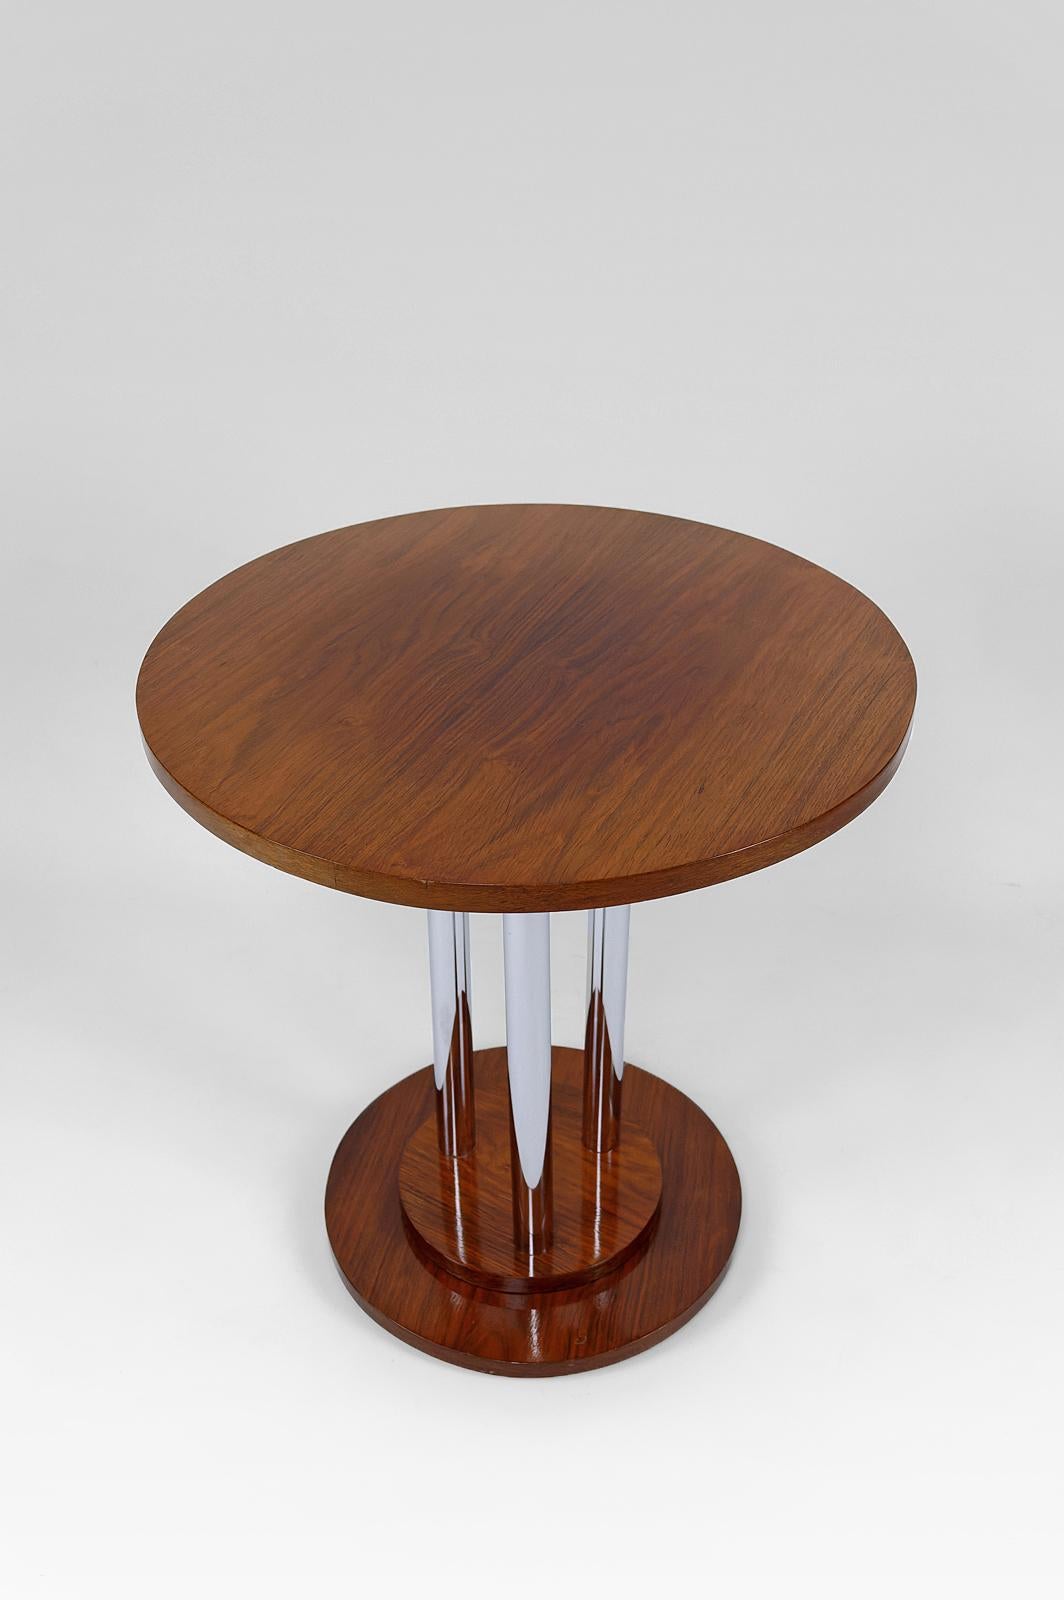 Modernist Art Deco pedestal table in walnut and chrome, France, Circa 1930 For Sale 2